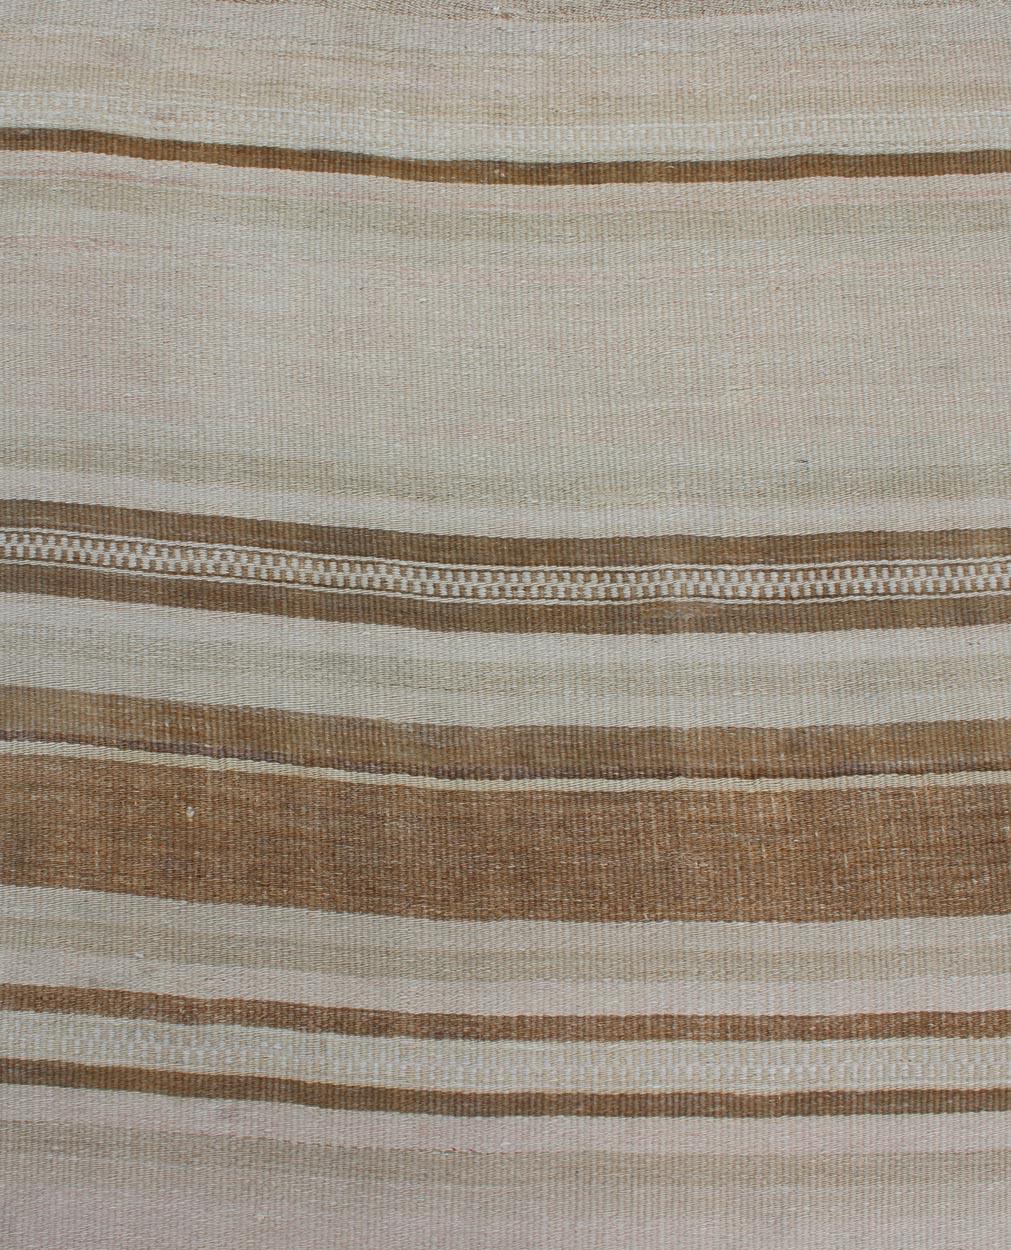 Vintage Turkish Kilim Runner with Stripes in Light Brown and Neutral Tones For Sale 3